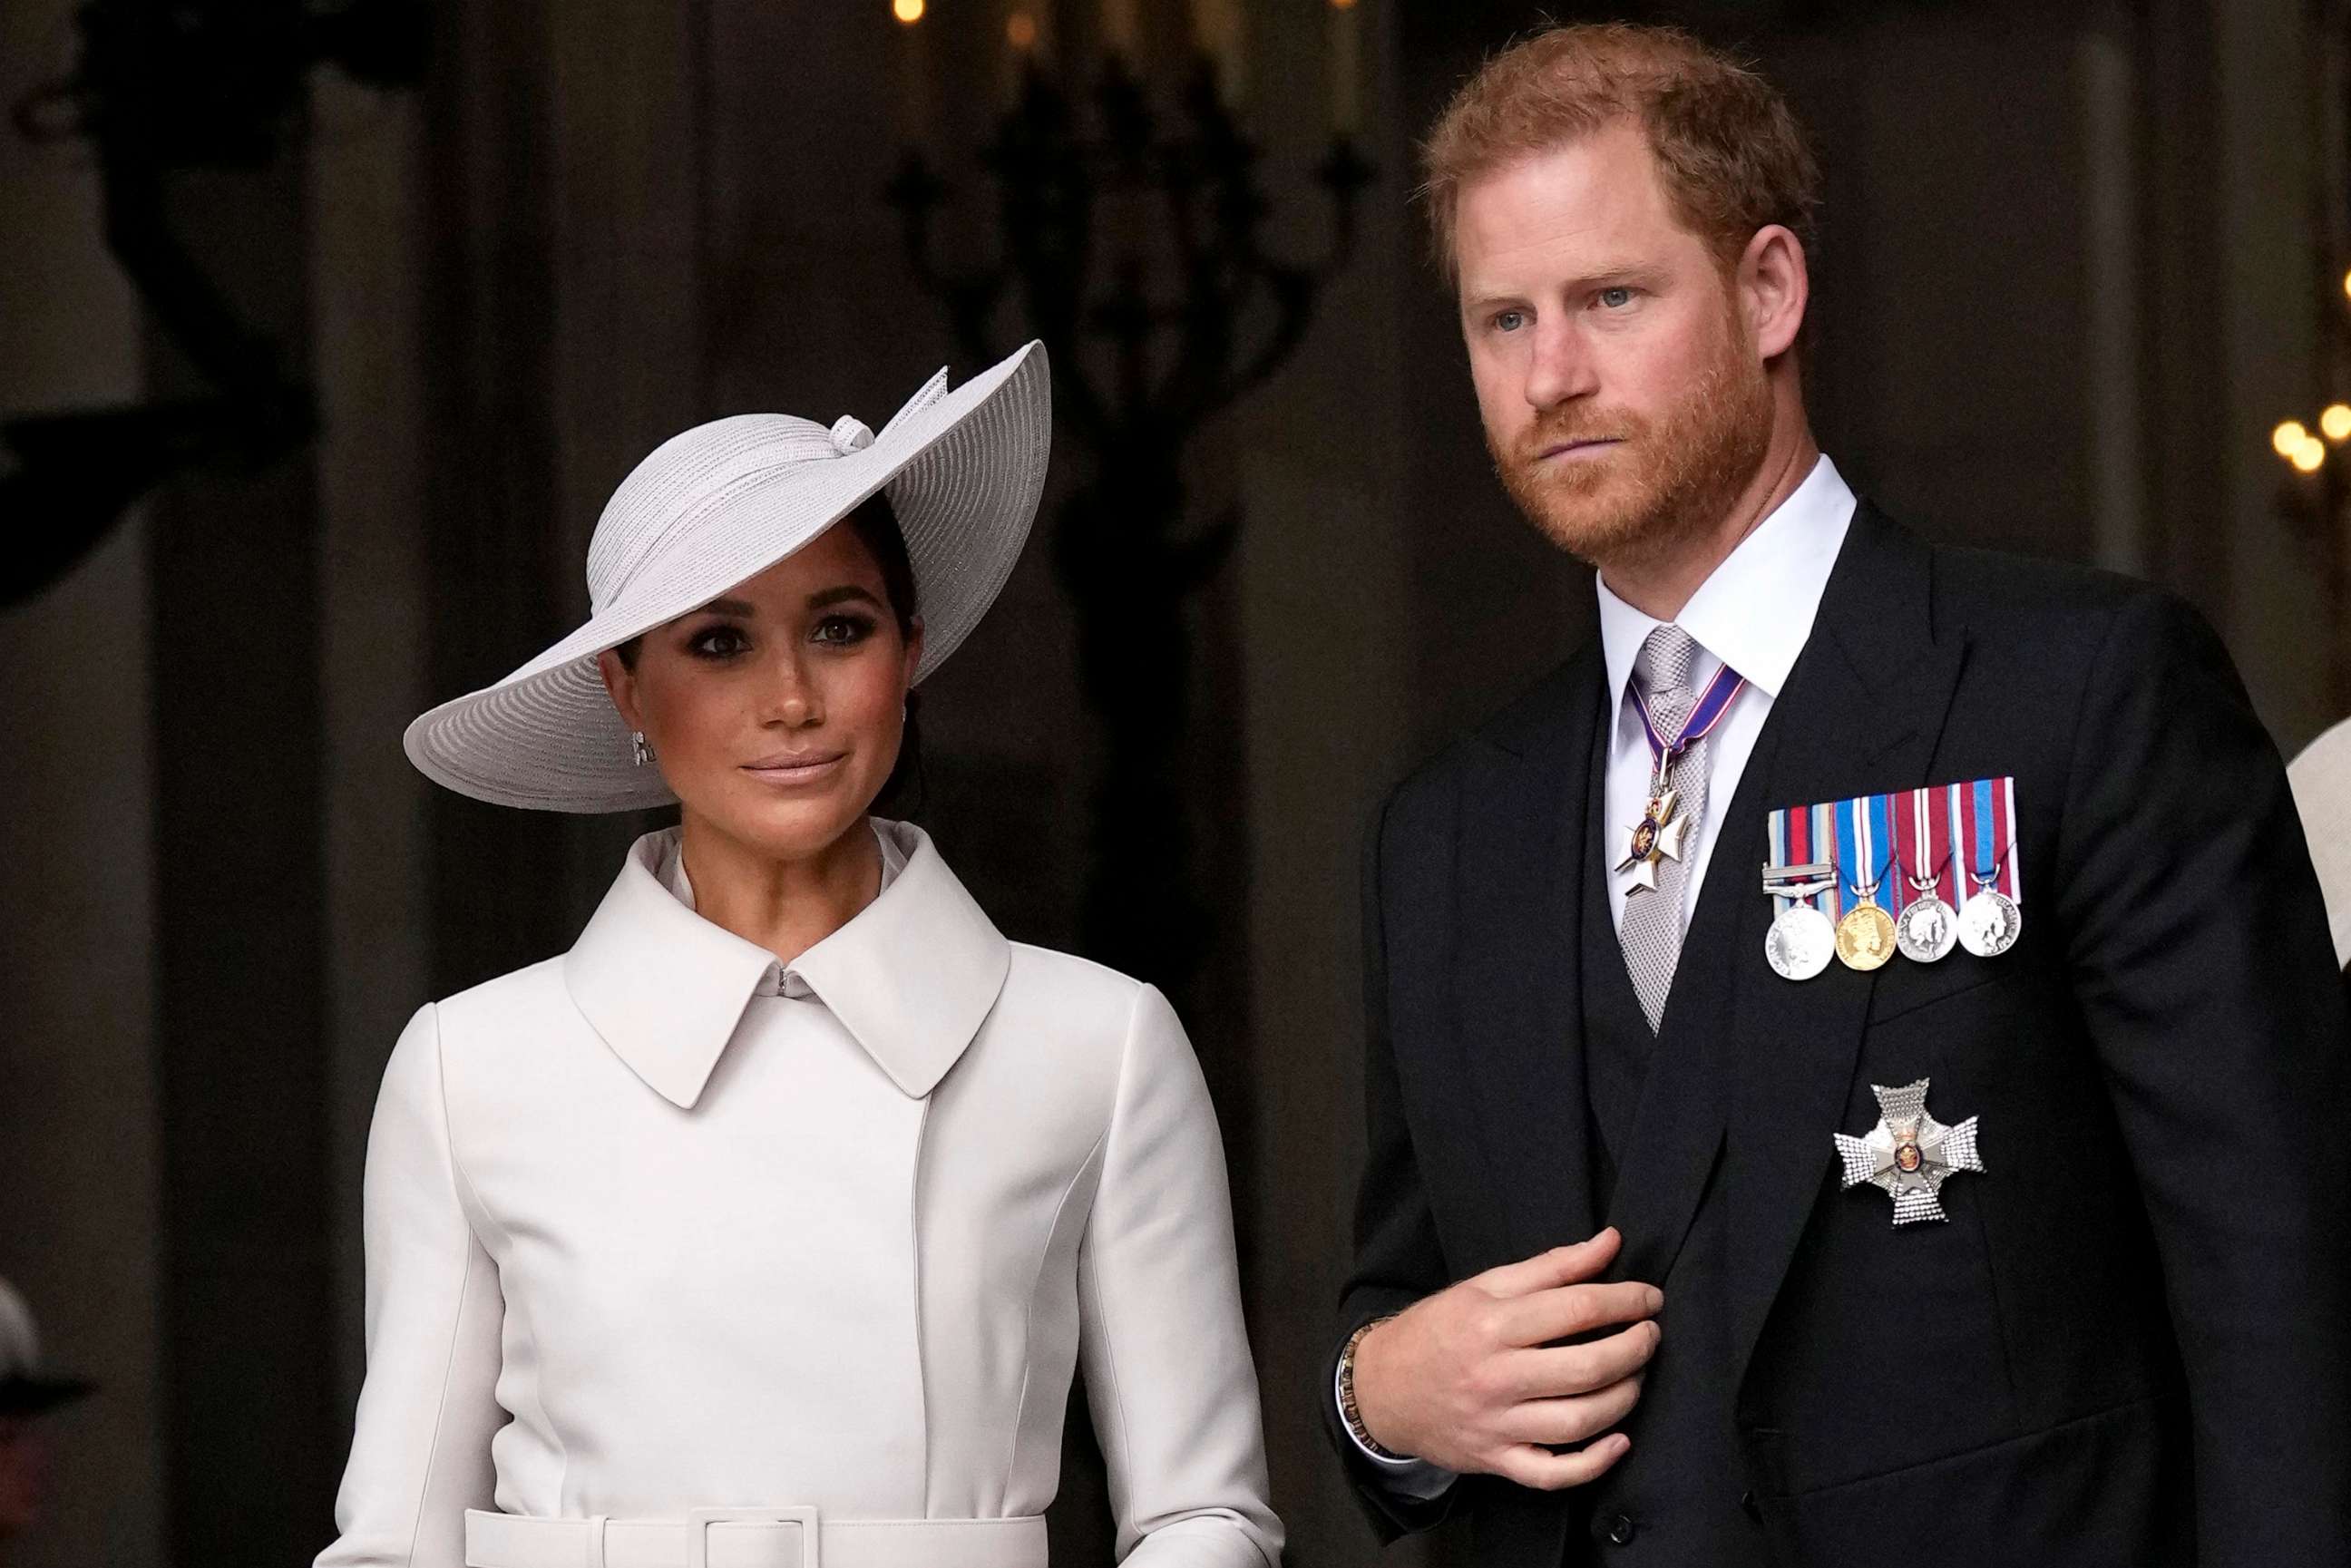 Prince Harry and Meghan Markle, Duke and Duchess of Sussex leave after a service of thanksgiving for the reign of Queen Elizabeth II at St Paul's Cathedral, June 3, 2022, in London.